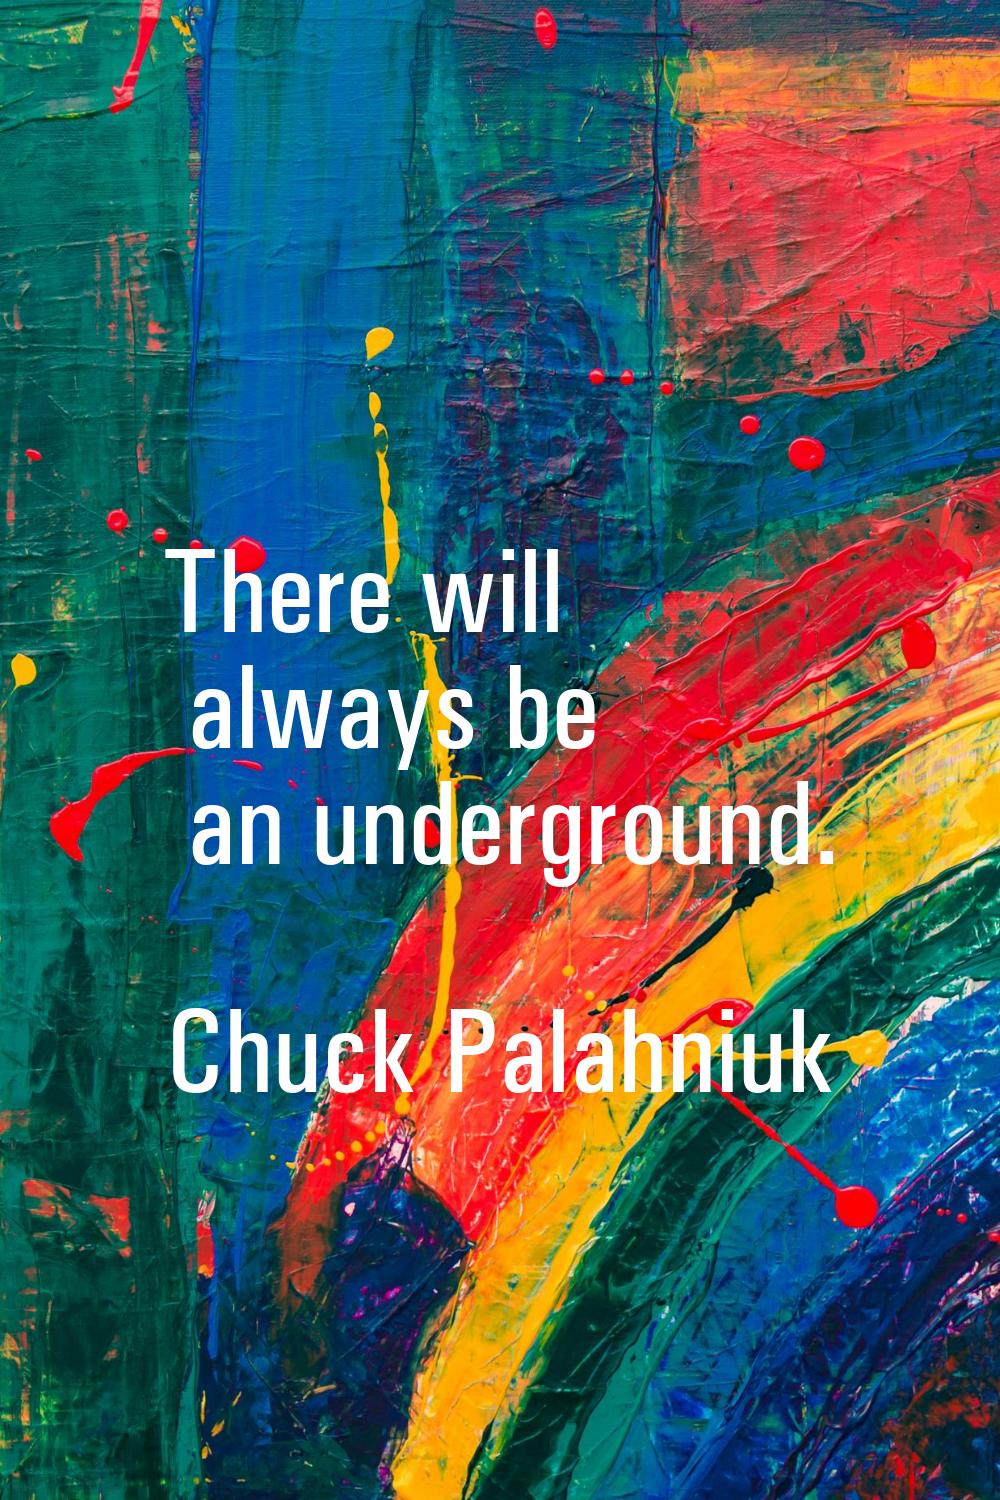 There will always be an underground.